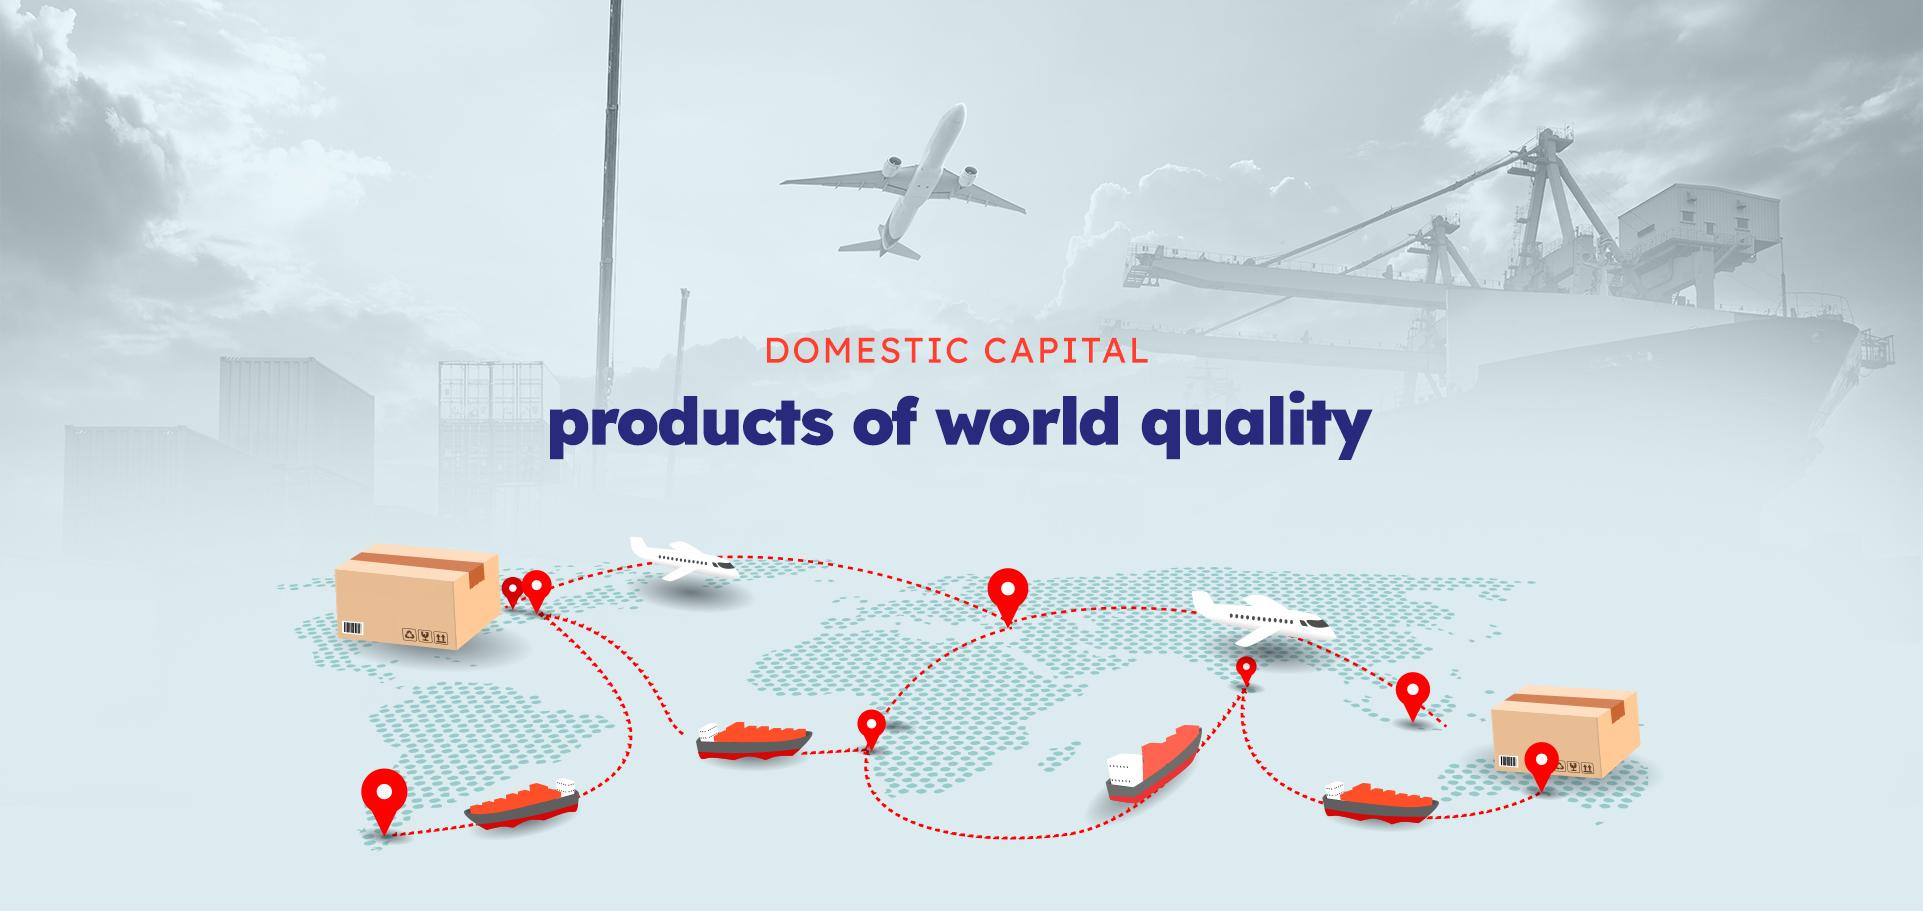 DOMESTIC CAPITAL PRODUCTS OF WORLD QUALITY 